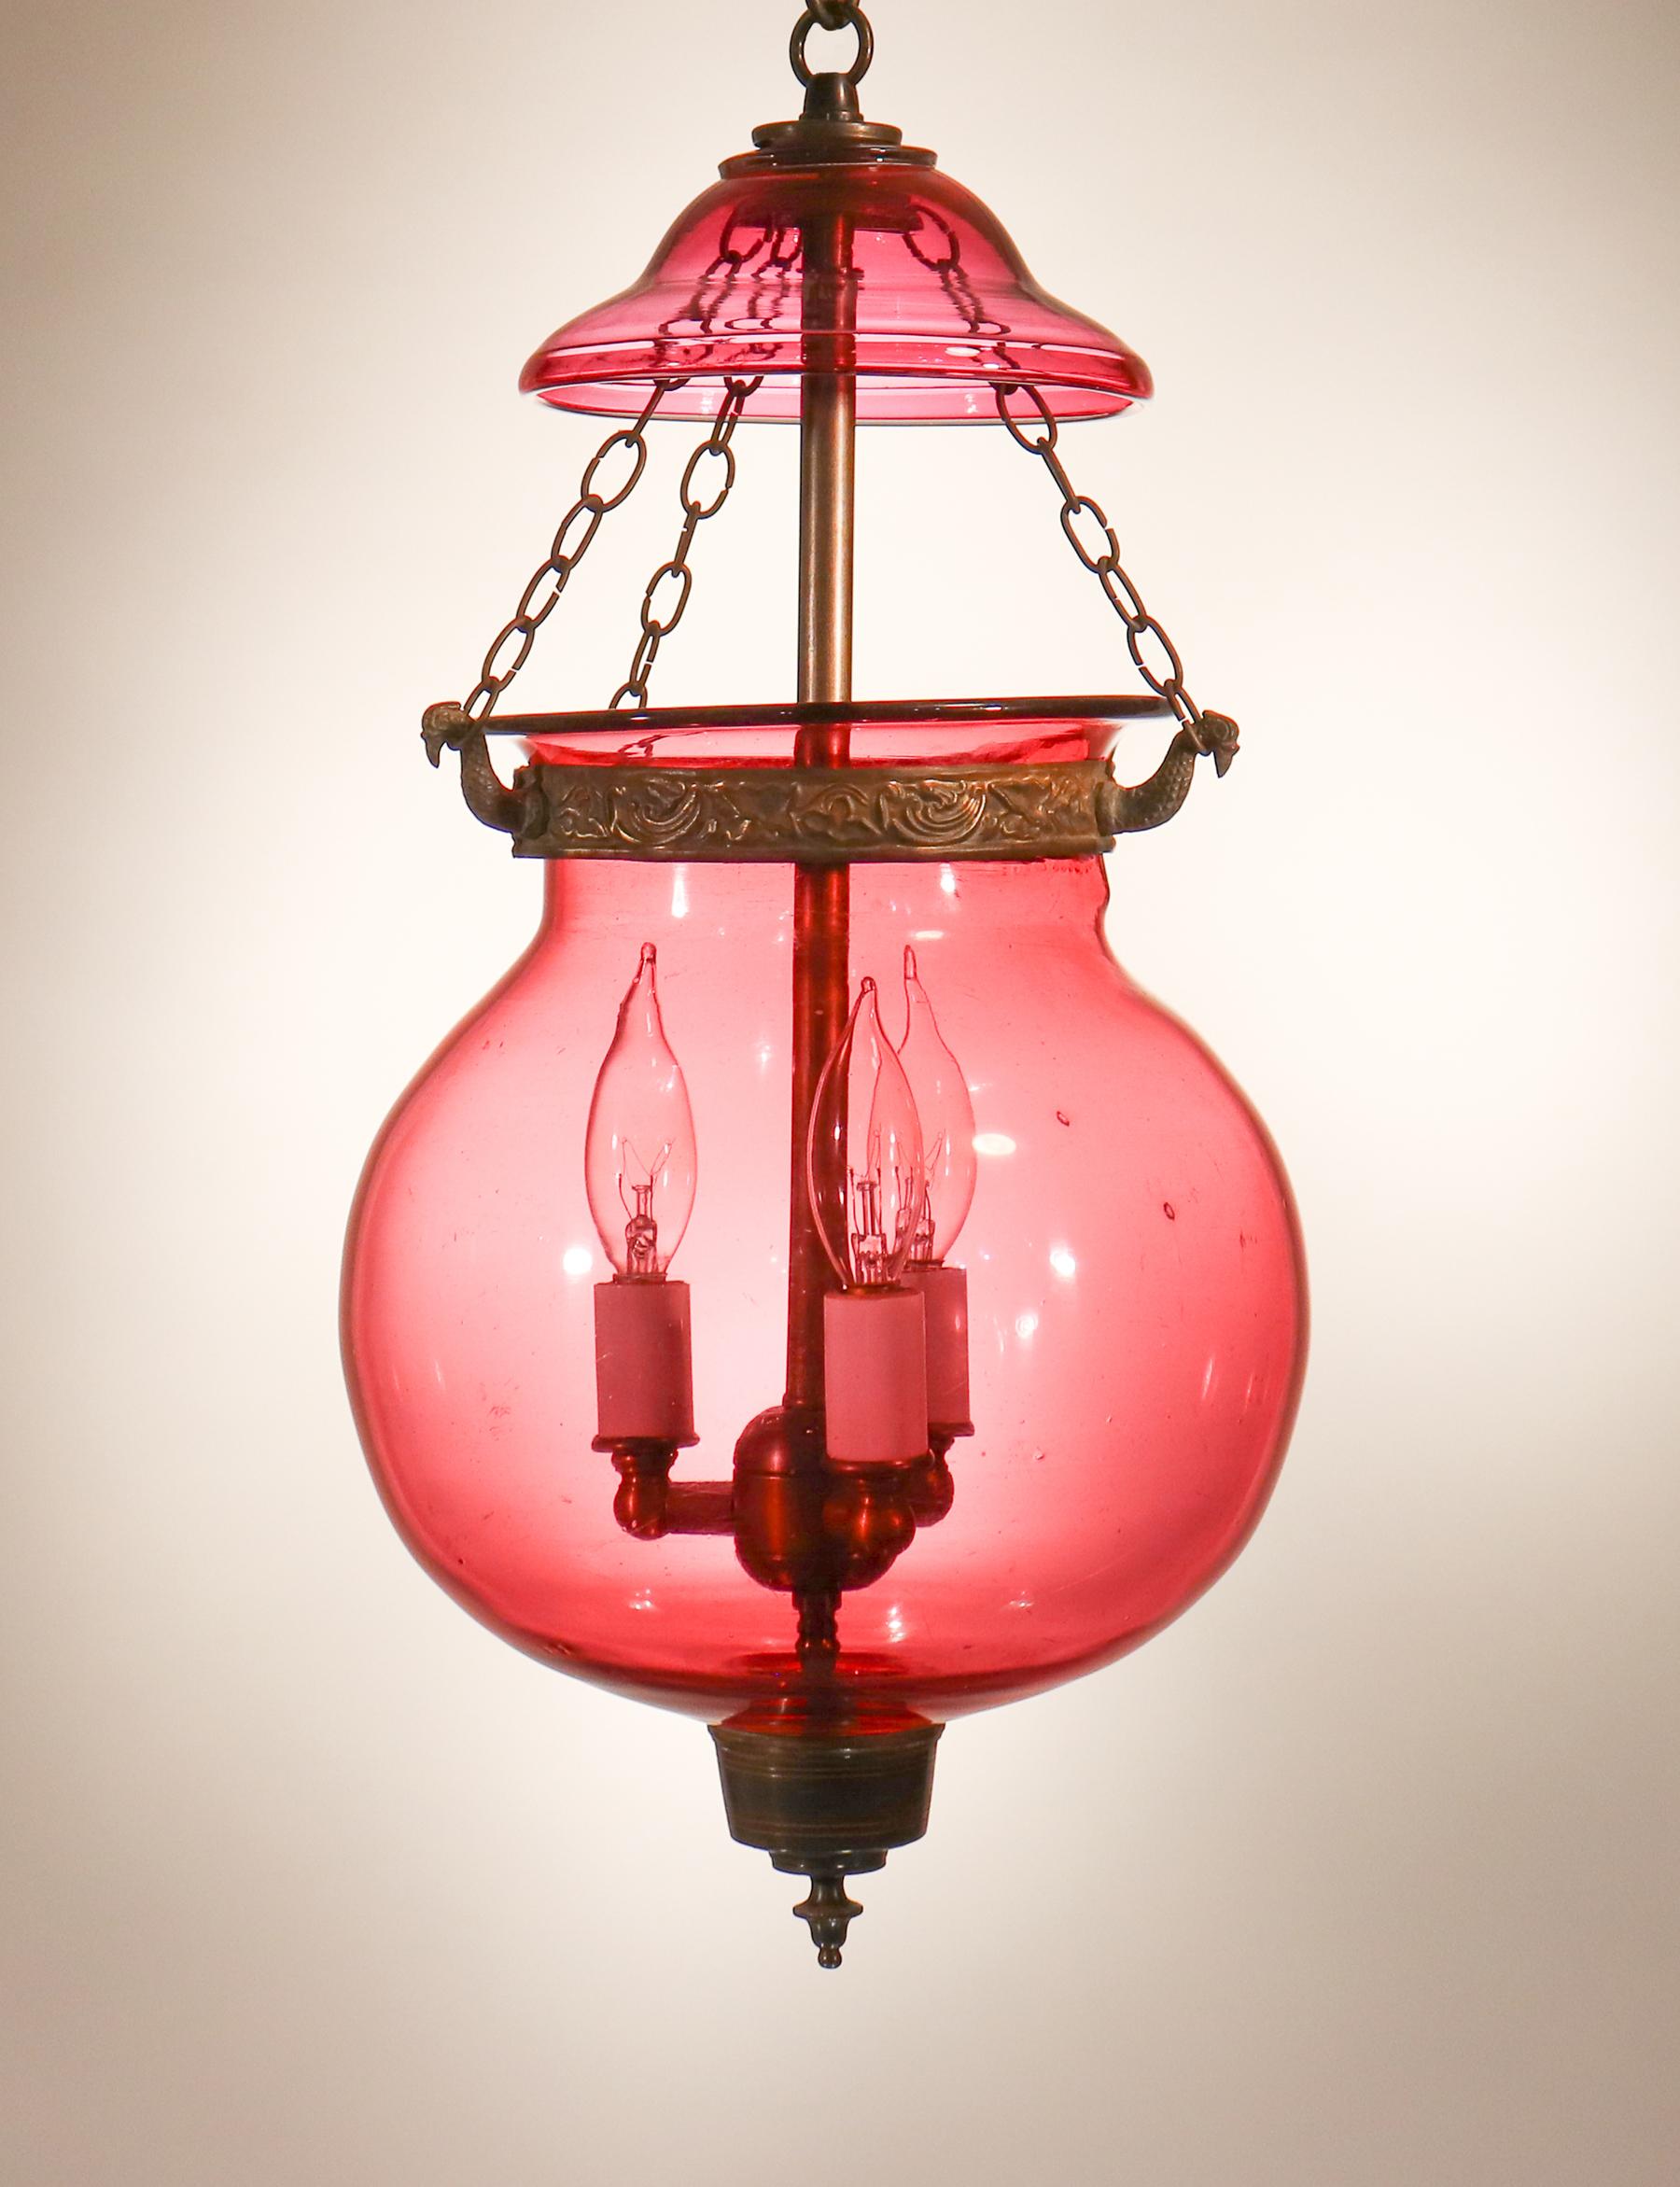 A charming and rare cranberry-colored hand blown glass globe bell jar lantern from Belgium, circa 1890, with attractive form and its original embossed brass band and chains. The globe's collar has the manufacturer's pressed mark, 